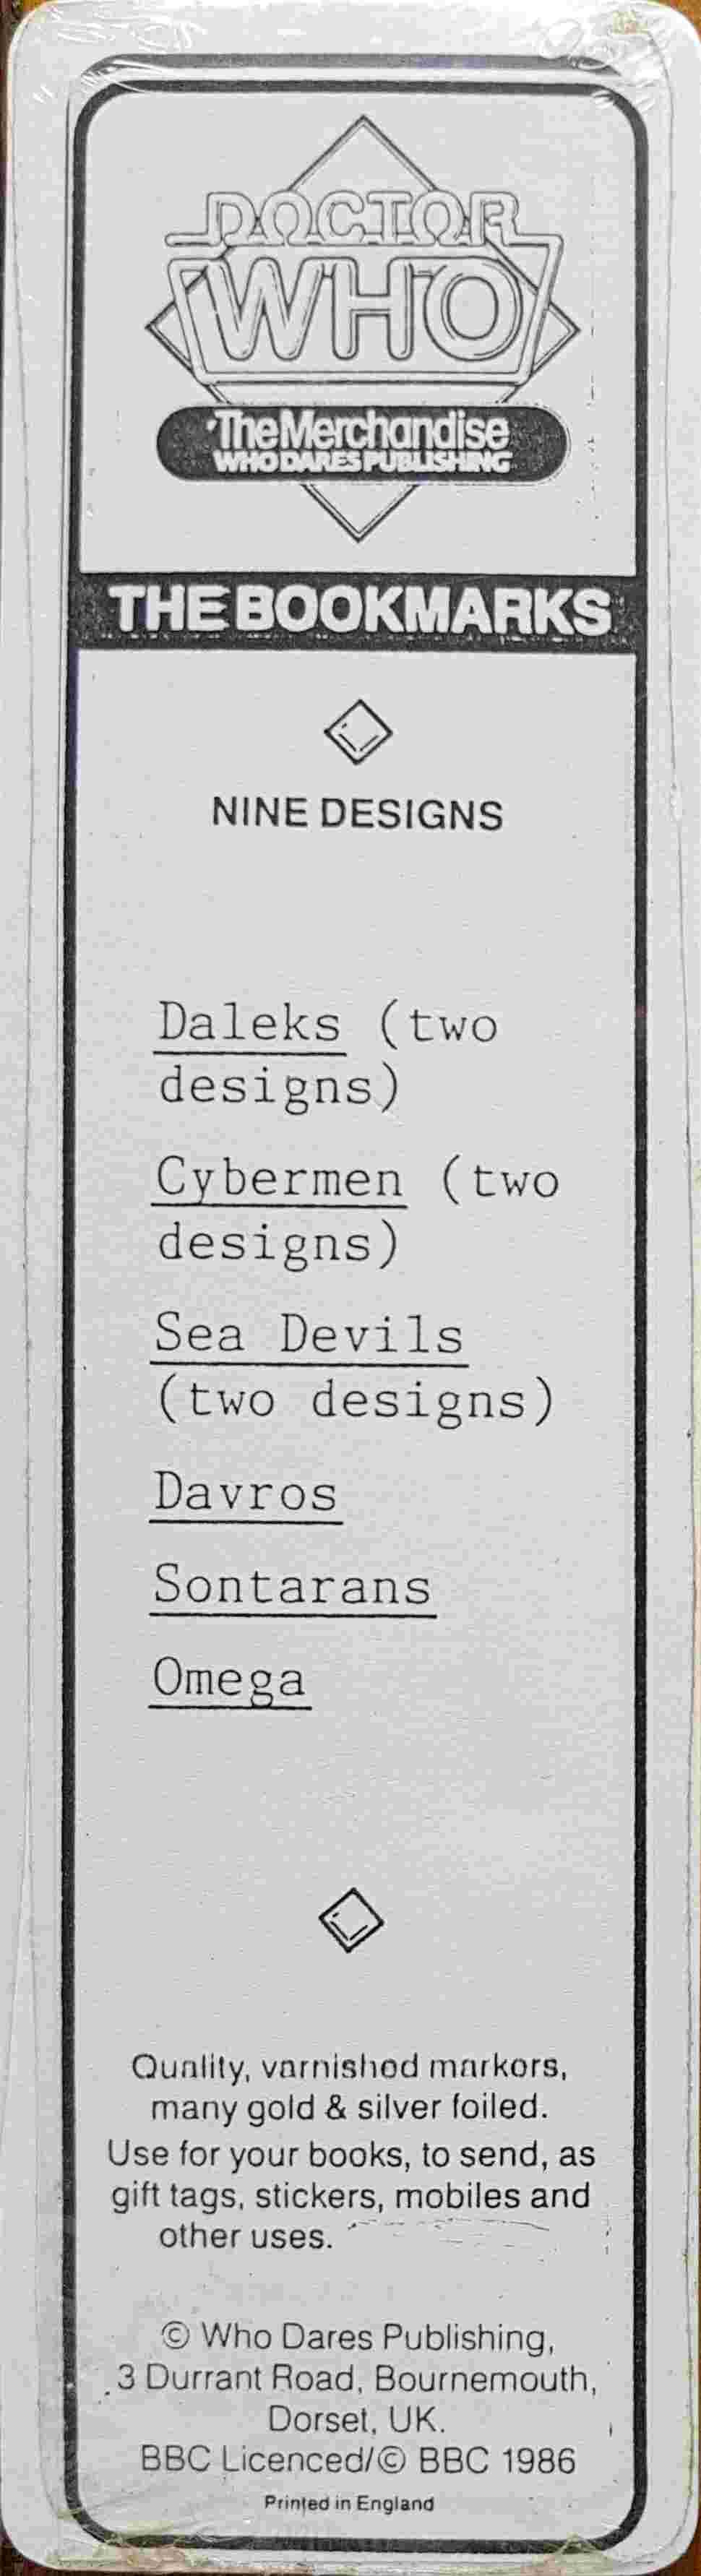 Picture of BM-DW-ND Bookmarks - Doctor Who by artist Unknown from the BBC records and Tapes library